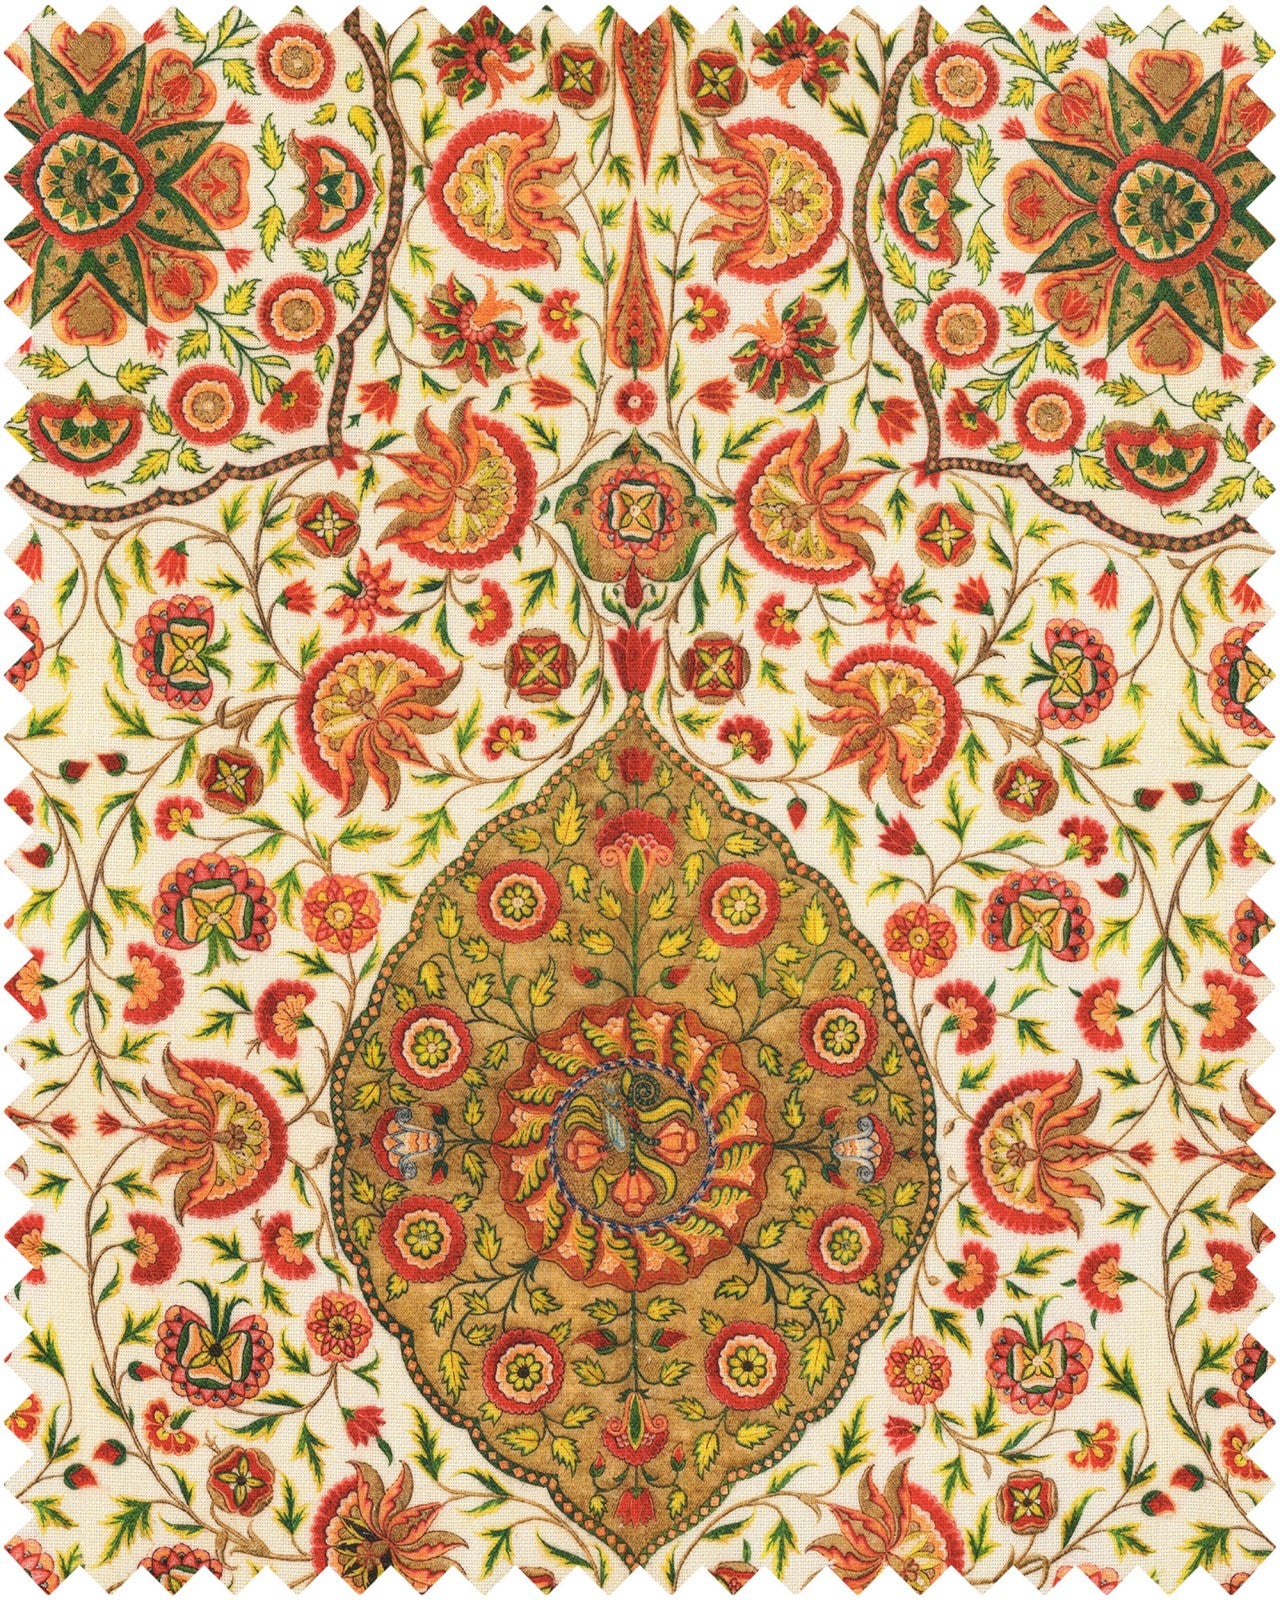 Csardas fabric in green white red taupe color - pattern number FB00043 - by Mind The Gap in the Transylvanian Roots collection